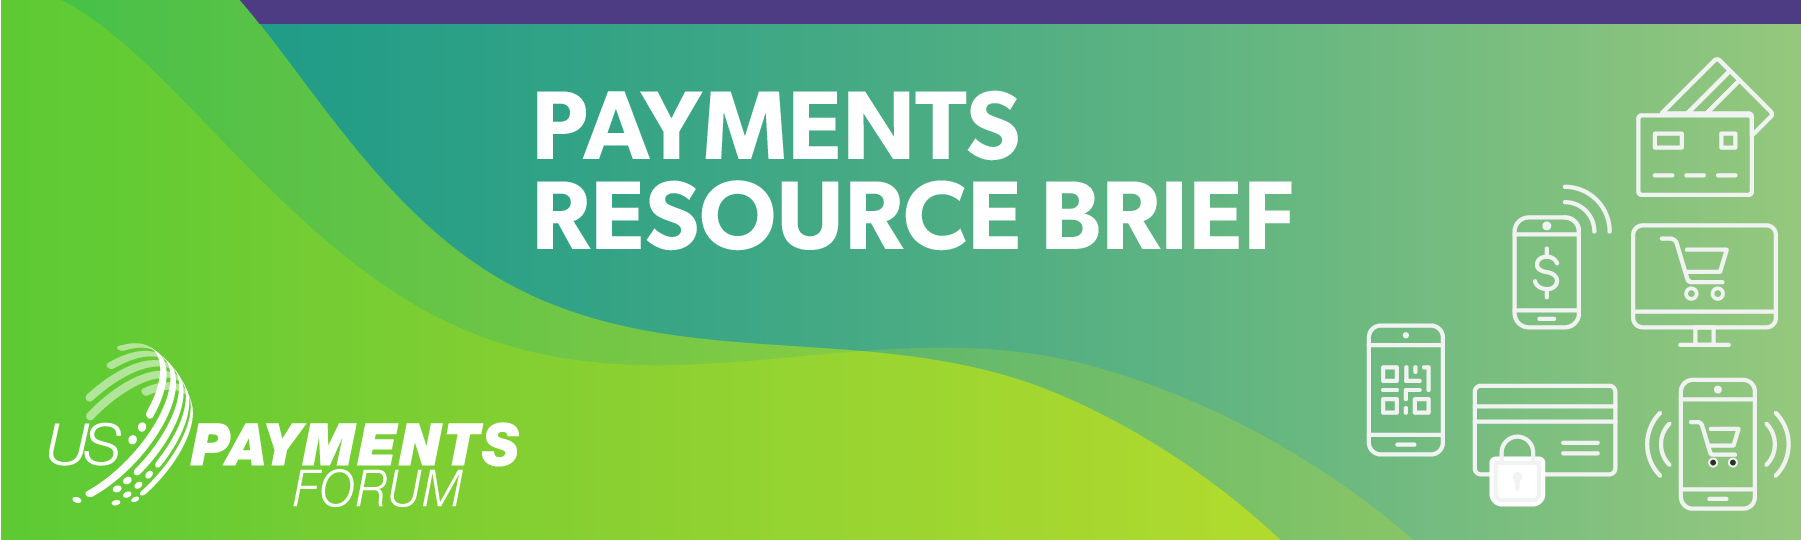 Payments Resource Brief